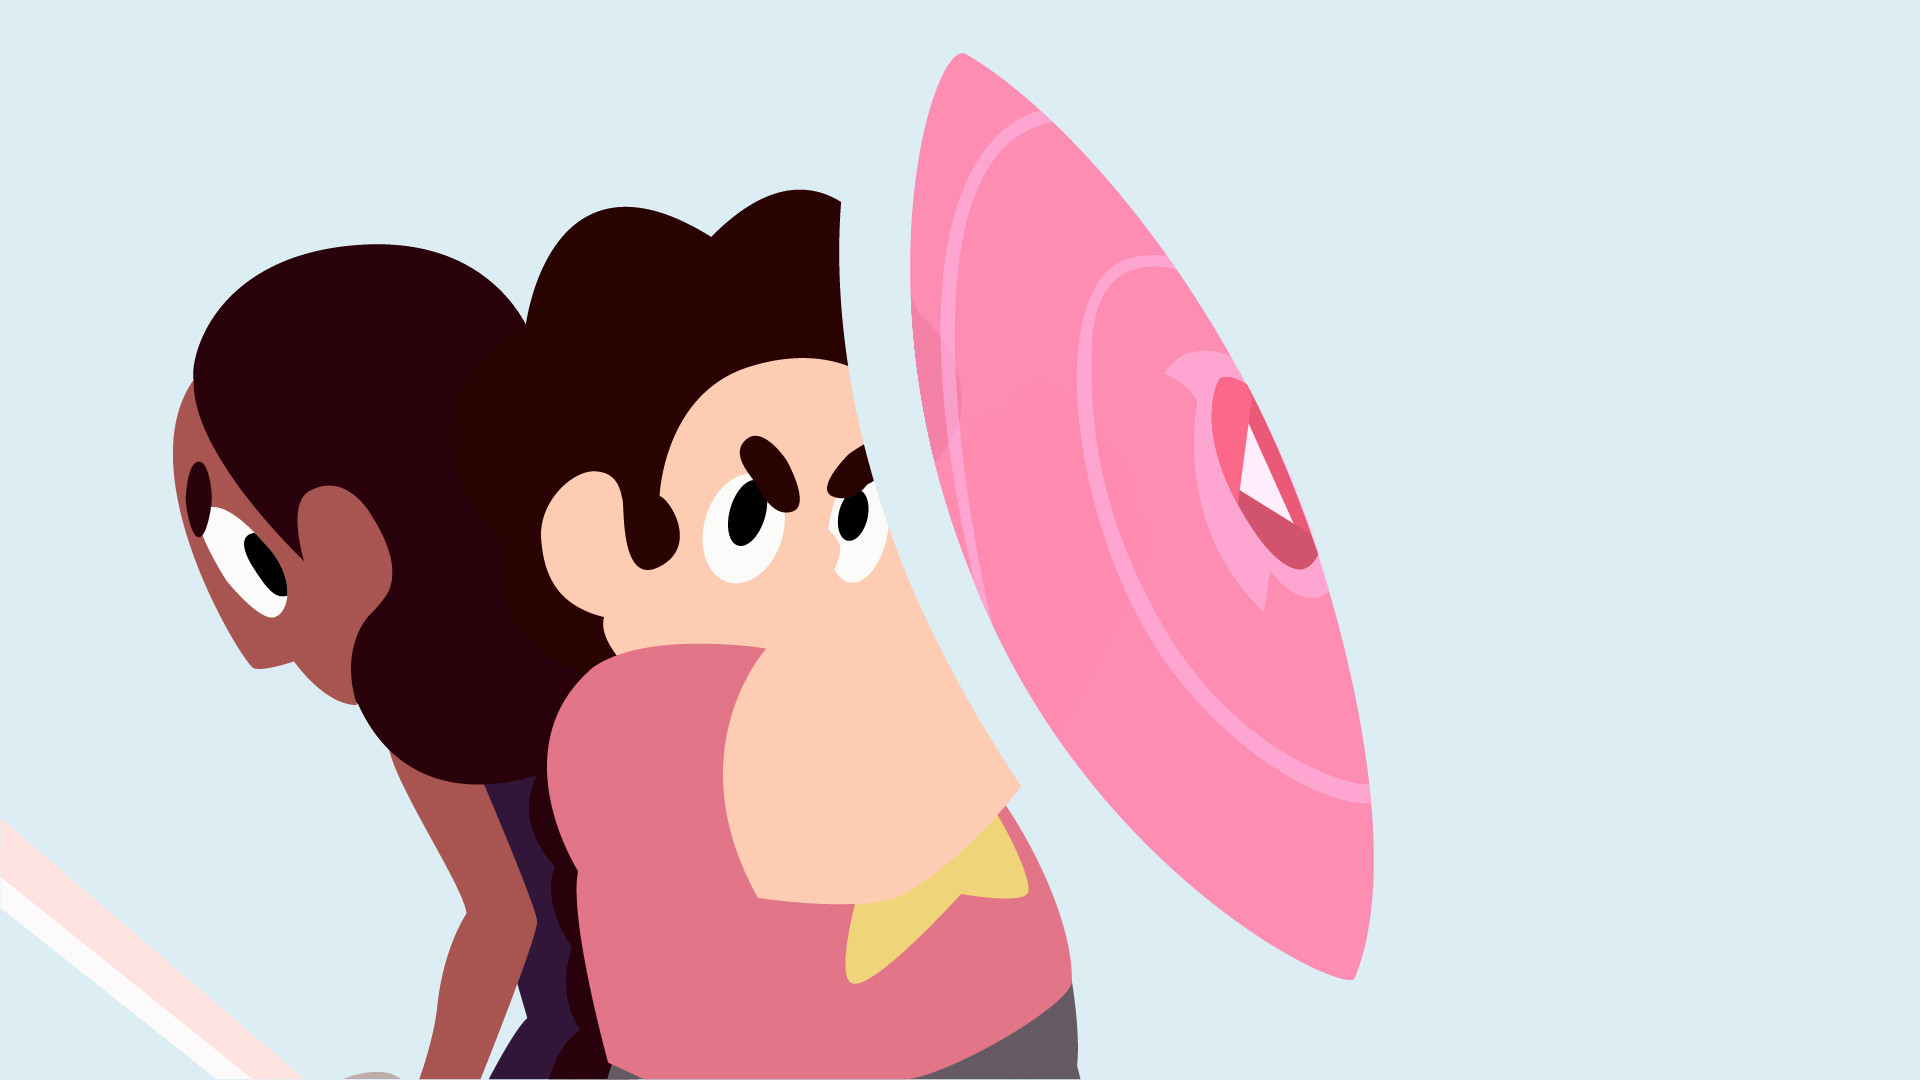 Steven and Connie by th3battula on DeviantArt